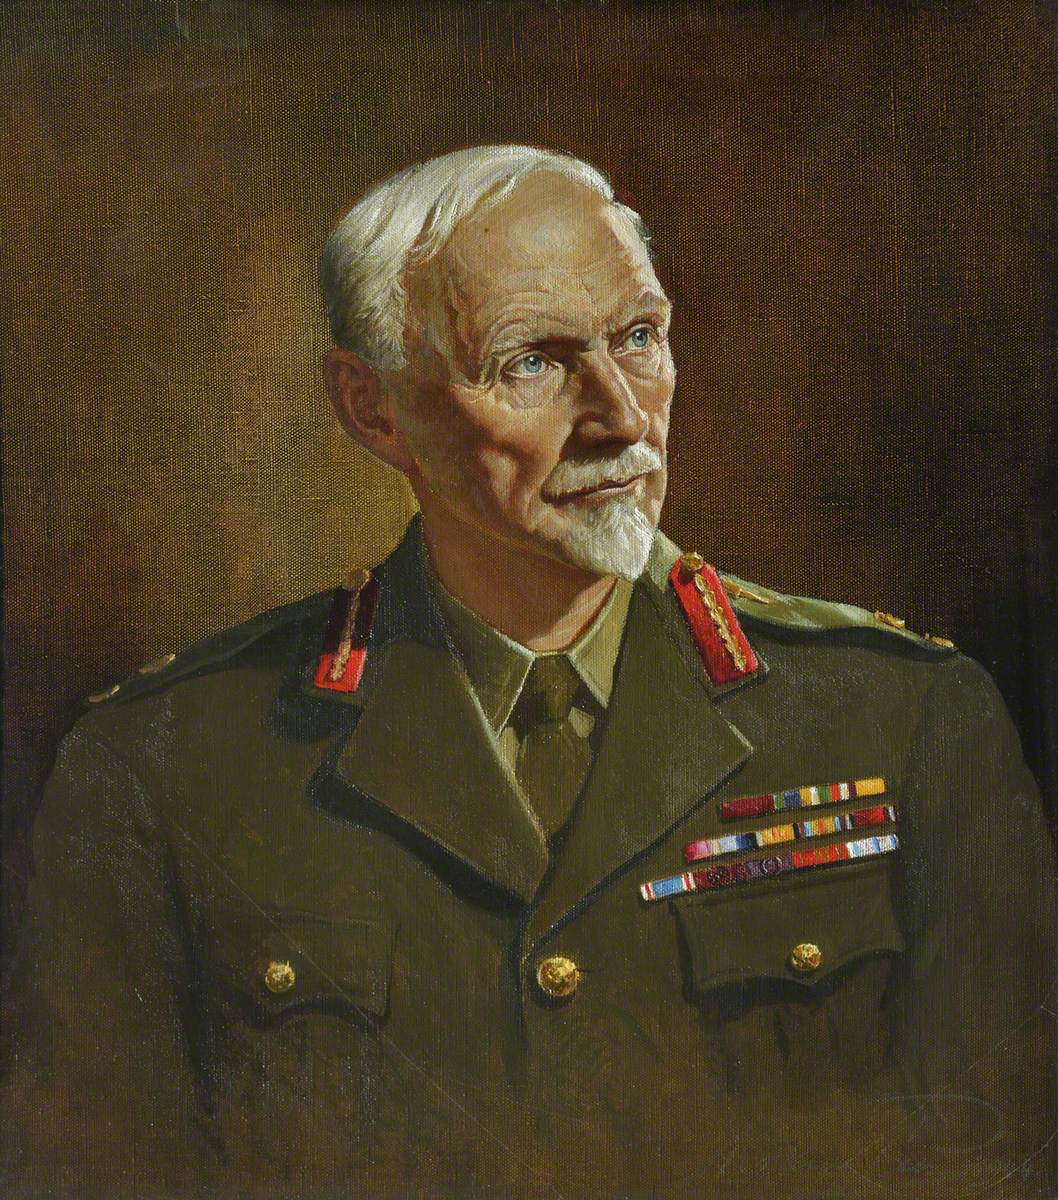 Jan Christian Smuts (1870–1950), Chancellor of the University (1948–1950), General of Boer Forces in Cape Colony, Prime Minister of South Africa (1919–1924 & 1939–1948)